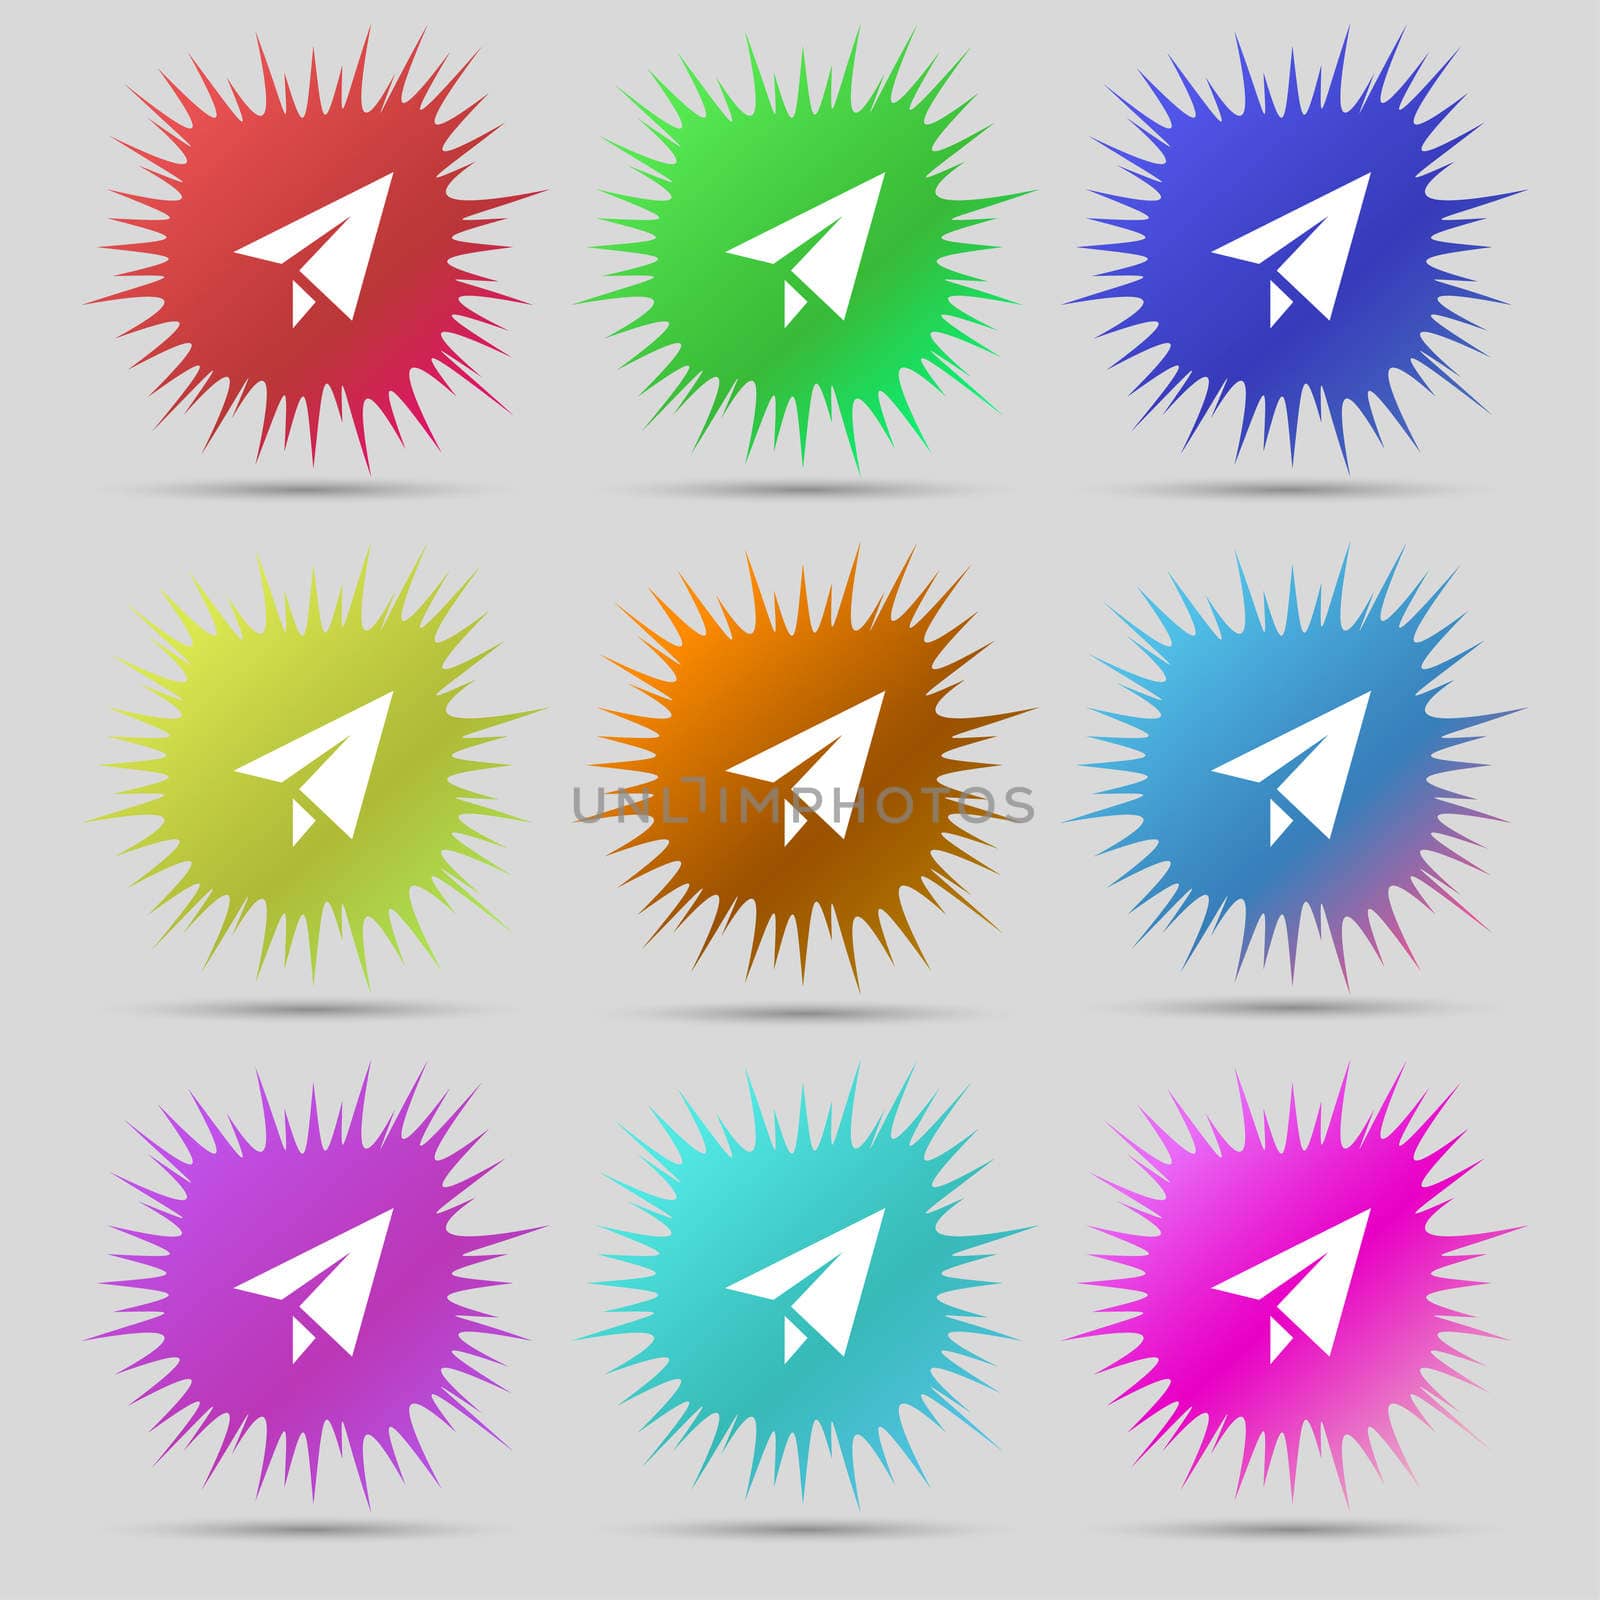 Paper airplane icon sign. A set of nine original needle buttons. illustration